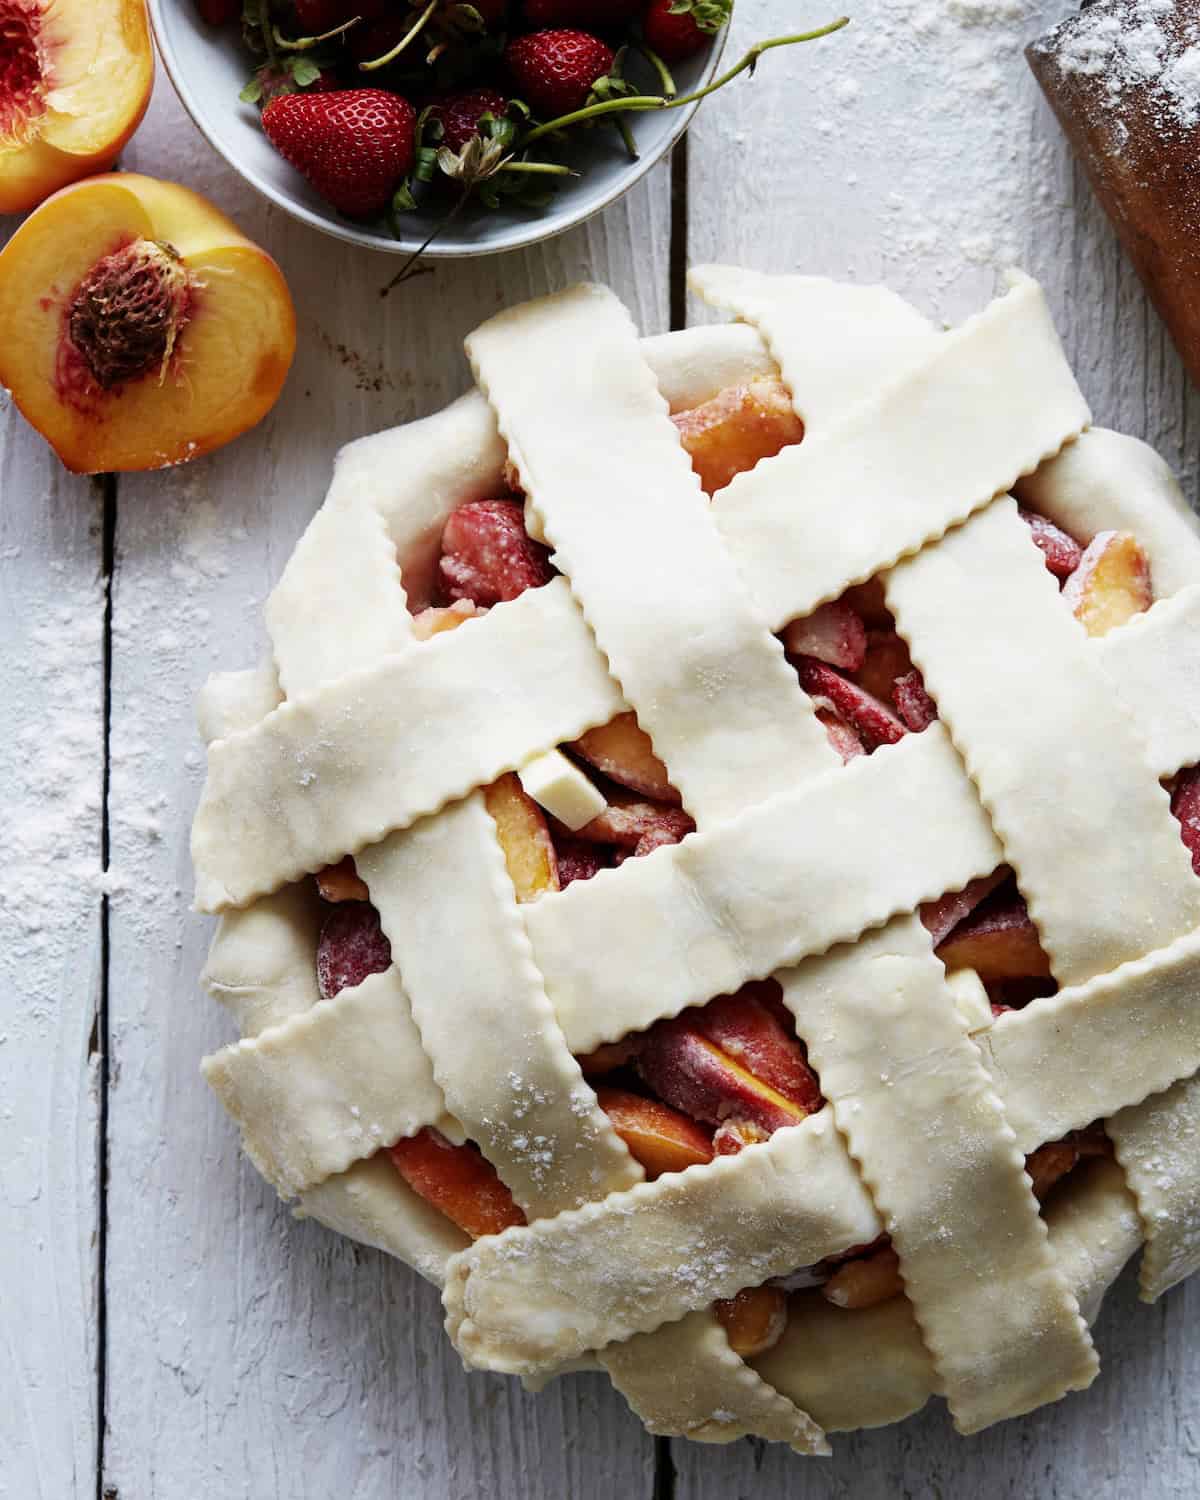 A strawberry peach pie with a lattice top ready to be baked, along with some halved peaches and a bowl of strawberries on the side.